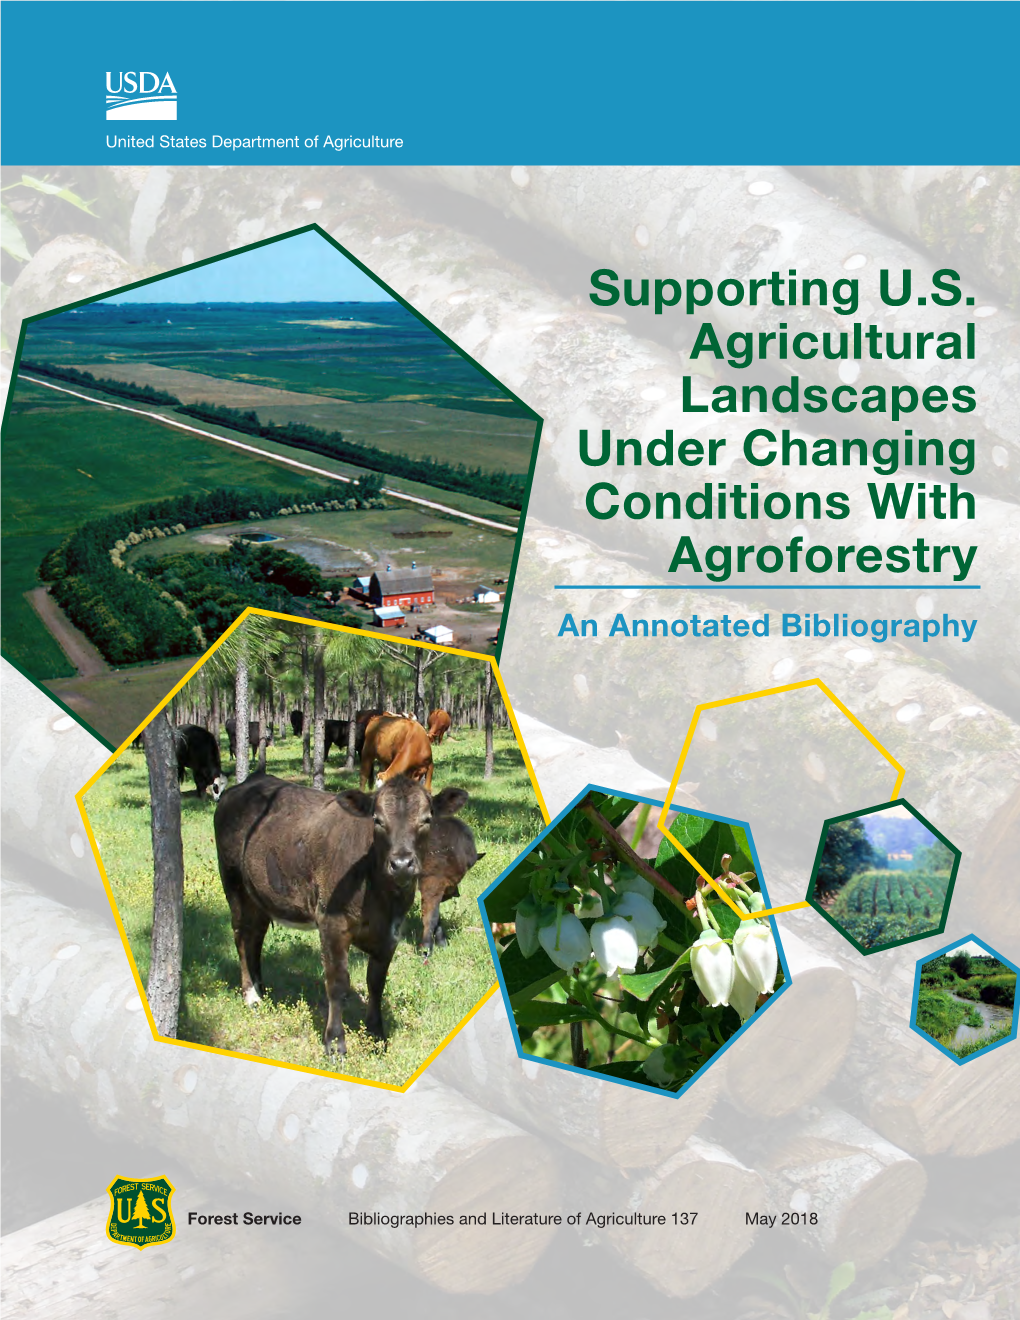 Supporting U.S. Agricultural Landscapes Under Changing Conditions with Agroforestry an Annotated Bibliography